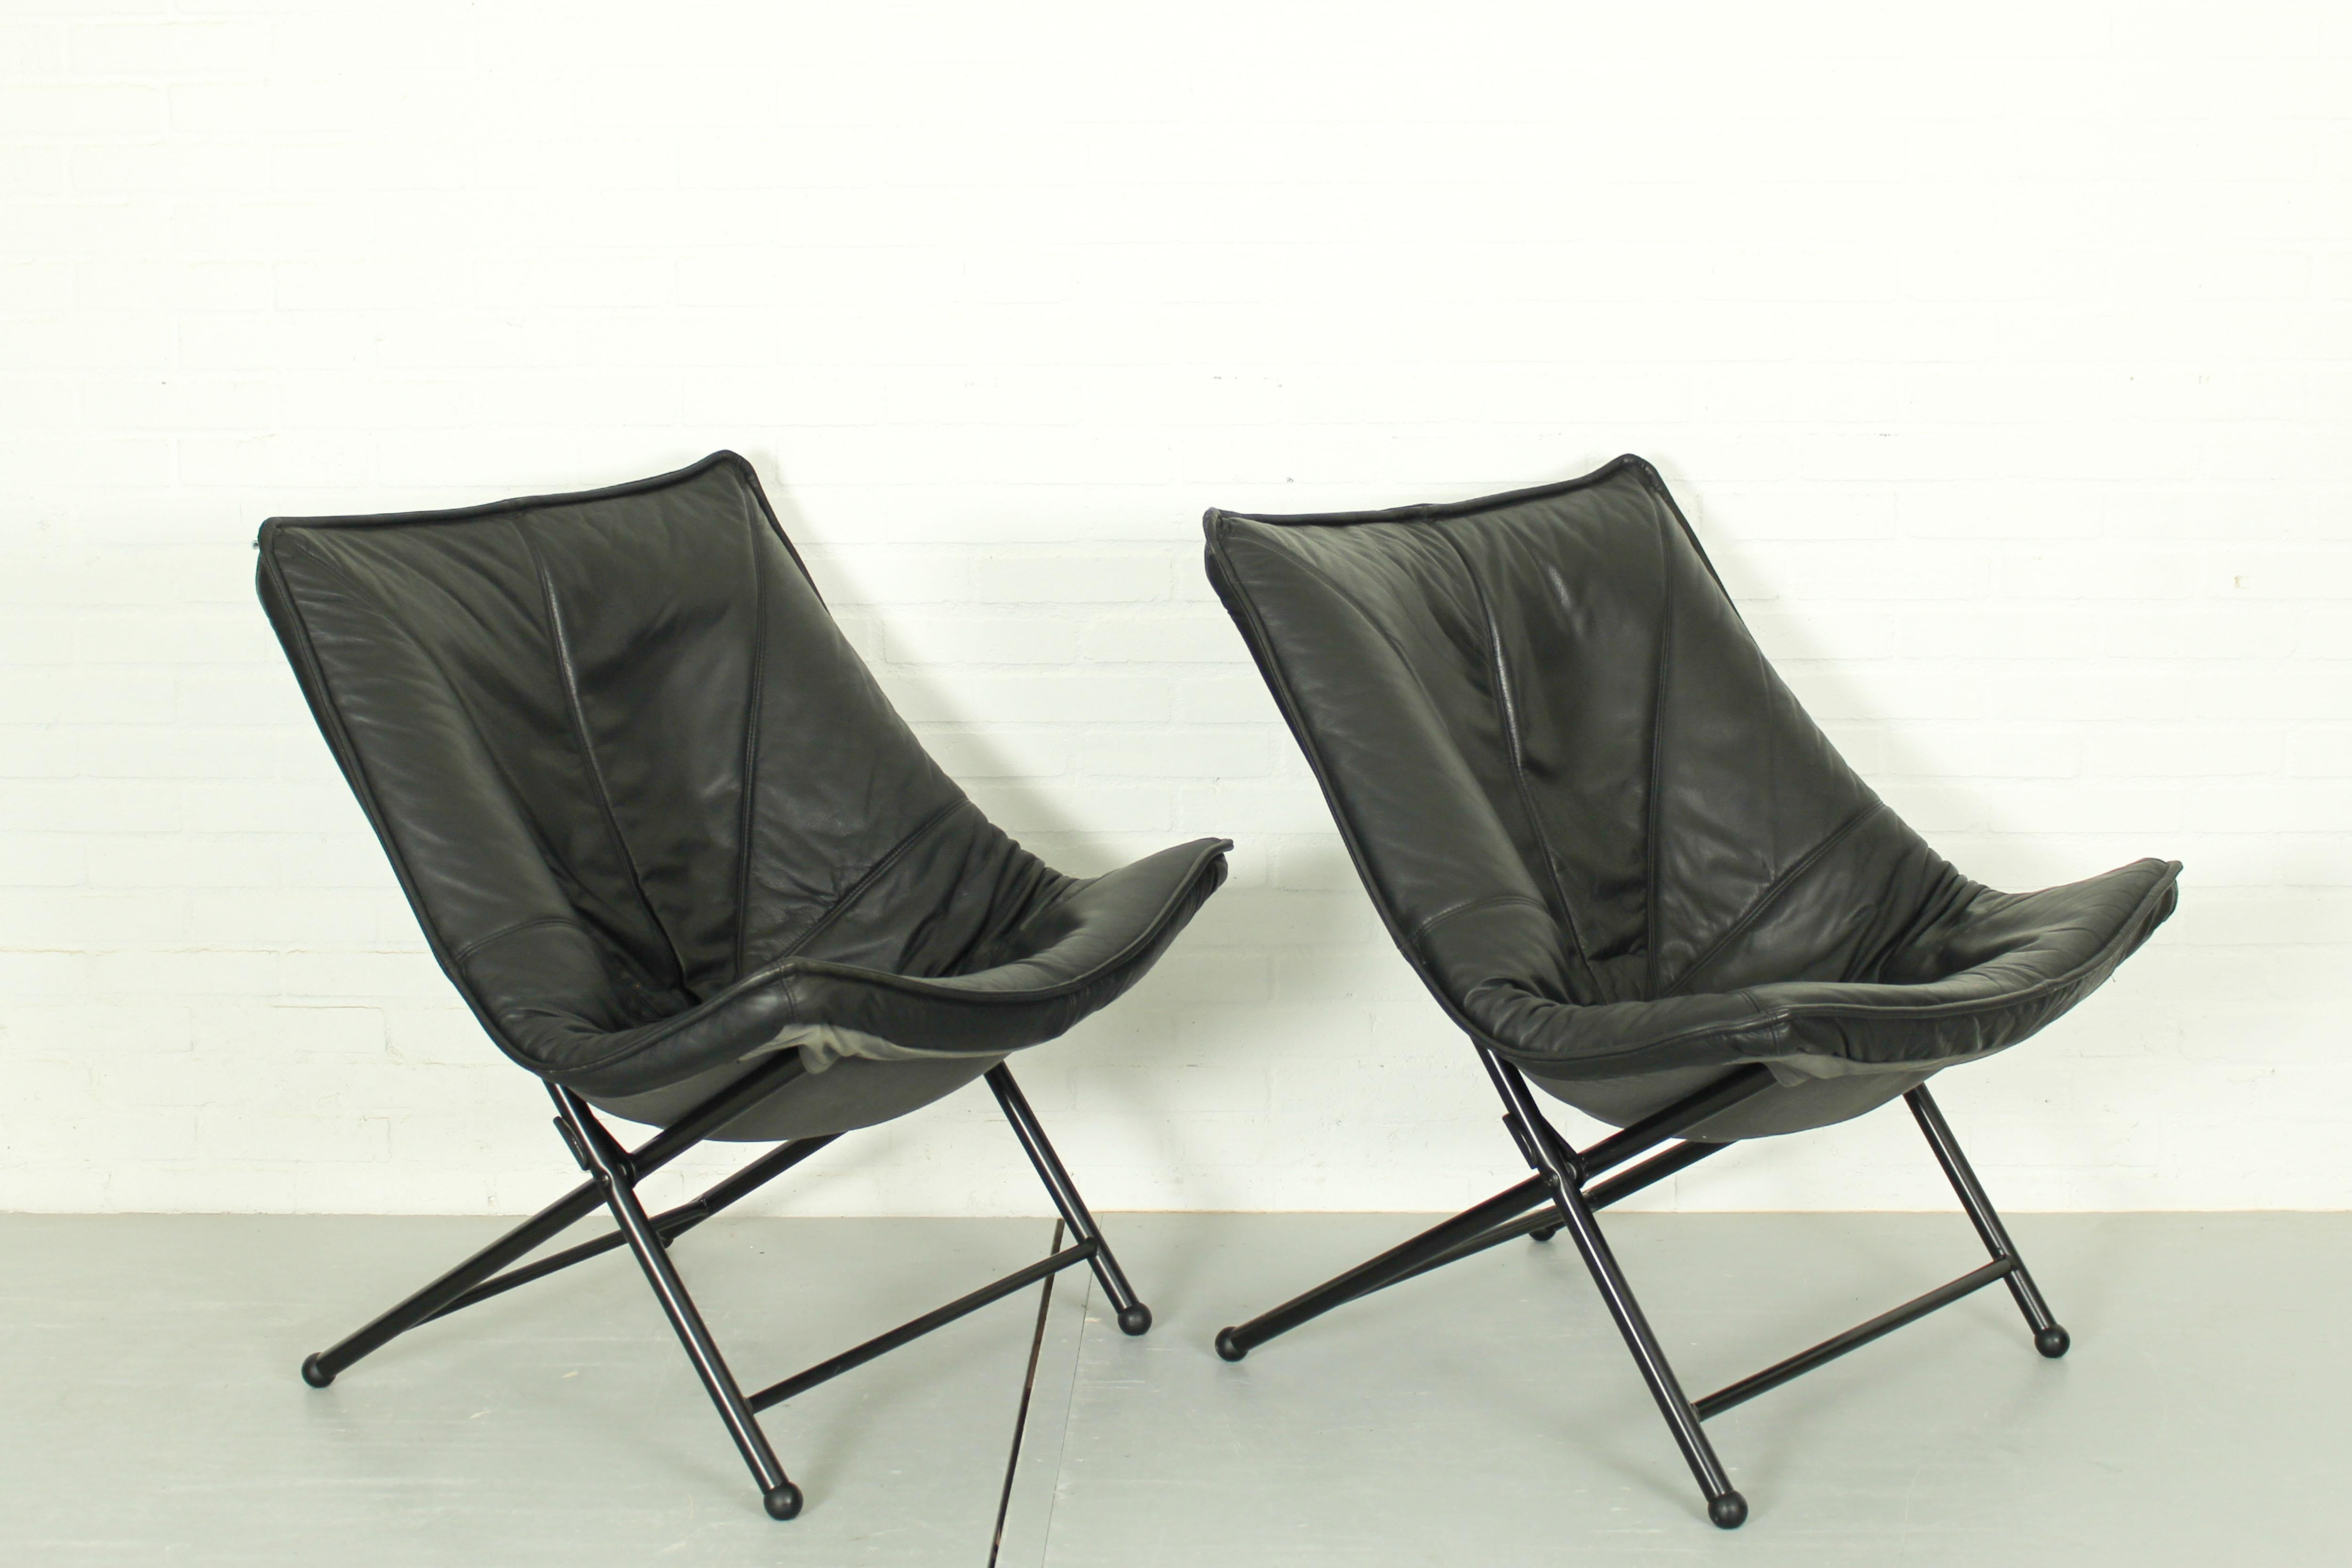 Folding Lounge Chairs in Black Leather by Teun Van Zanten for Molinari, 1970s For Sale 1